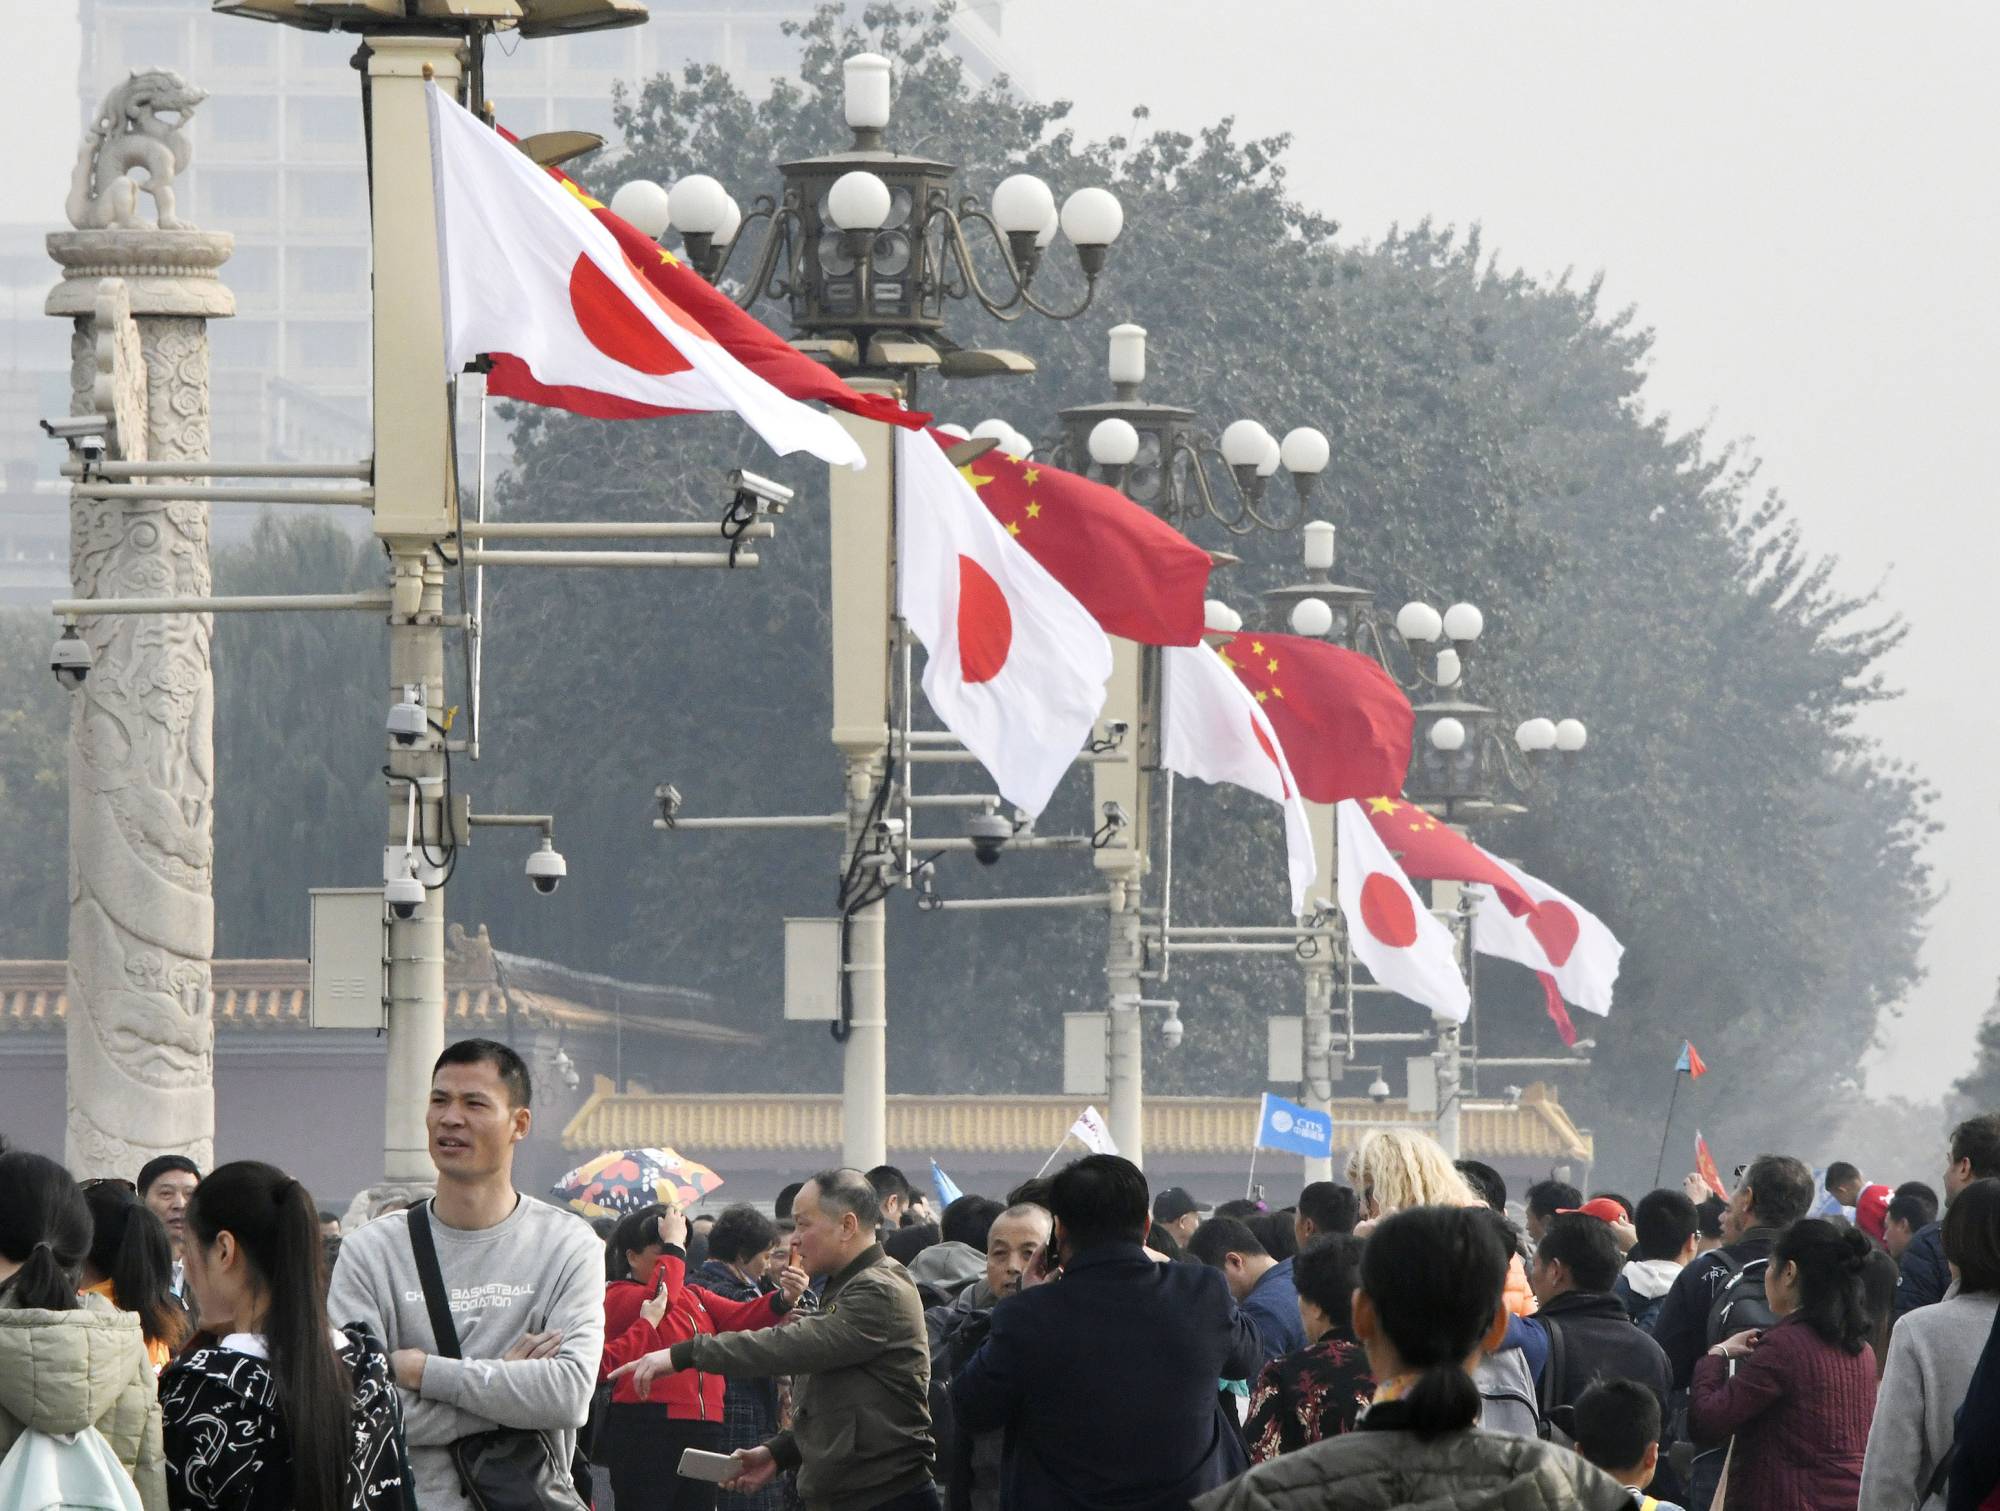 Japanese and Chinese national flags fly in Tiananmen Square in Beijing in October 2018, ahead of a visit to China by then-Prime Minister Shinzo Abe. | KYODO